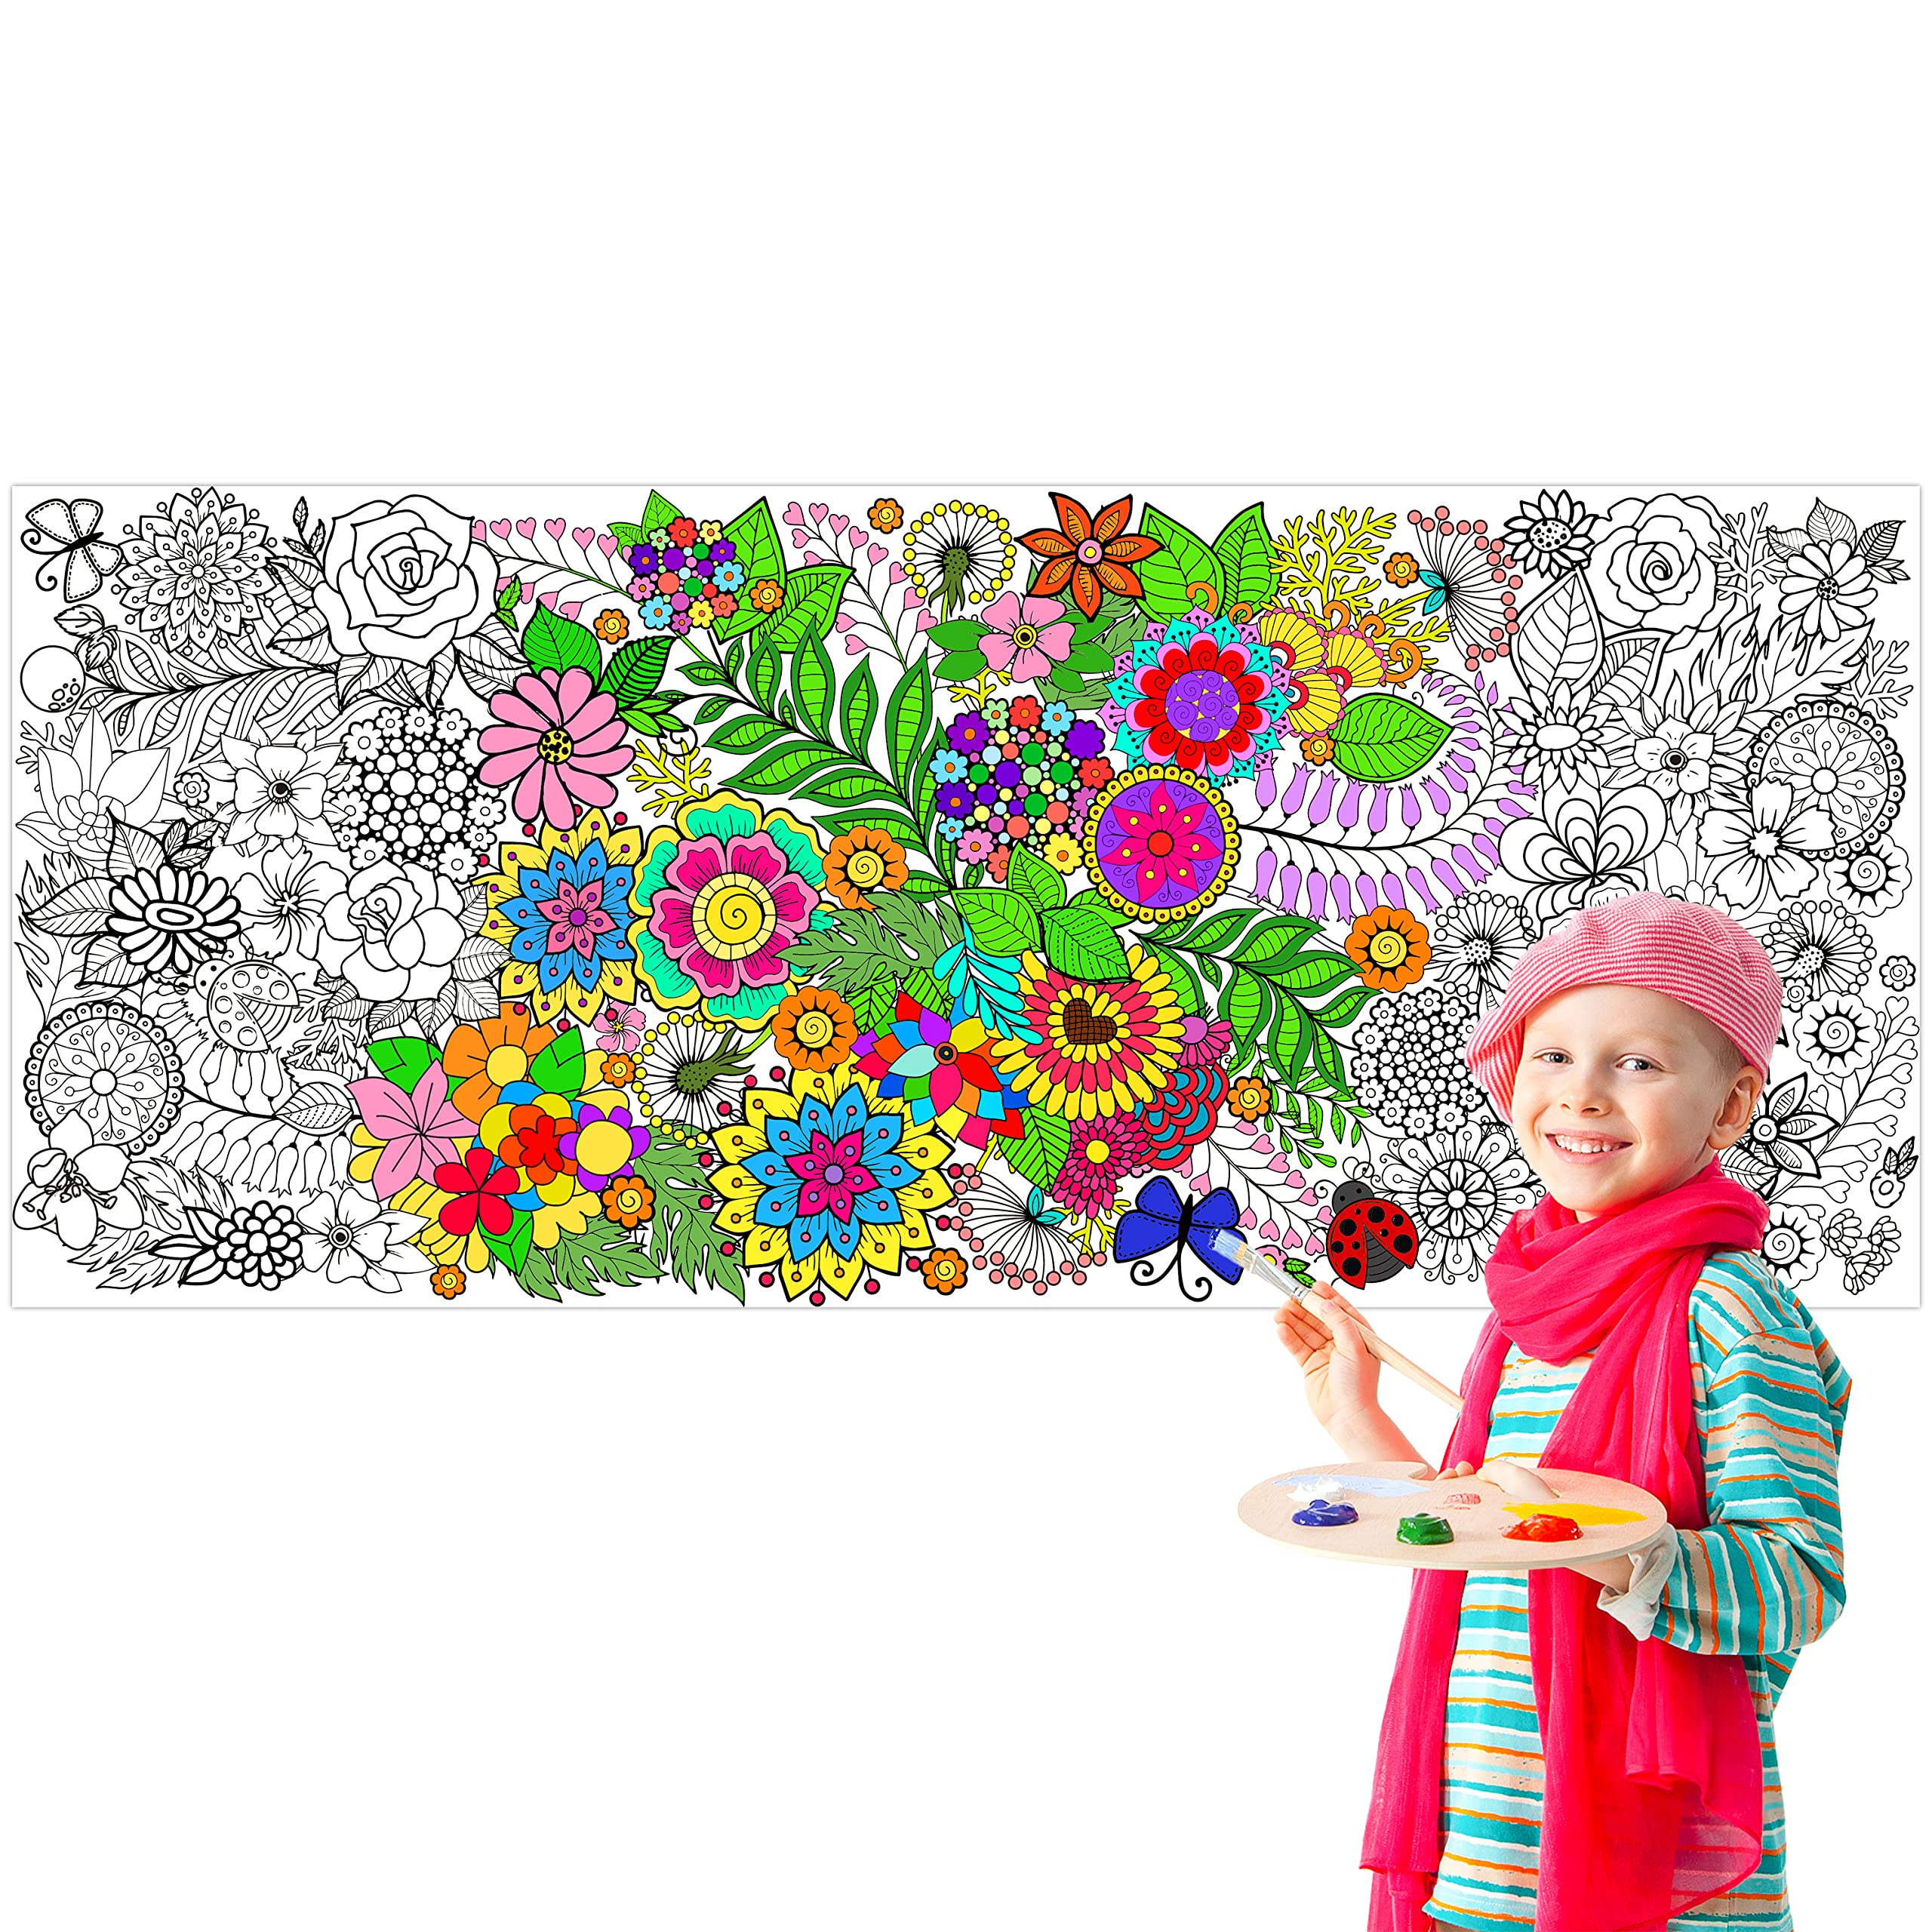 Dvbonike Jumbo Mandala Coloring Poster Giant Flower DIY Color-in Paper Art Blank Banner 55.1 x 23.6 Inch Drawing Tablecloth Wall Decor Party School Class Activities for Kids Arts Craft Suppiles